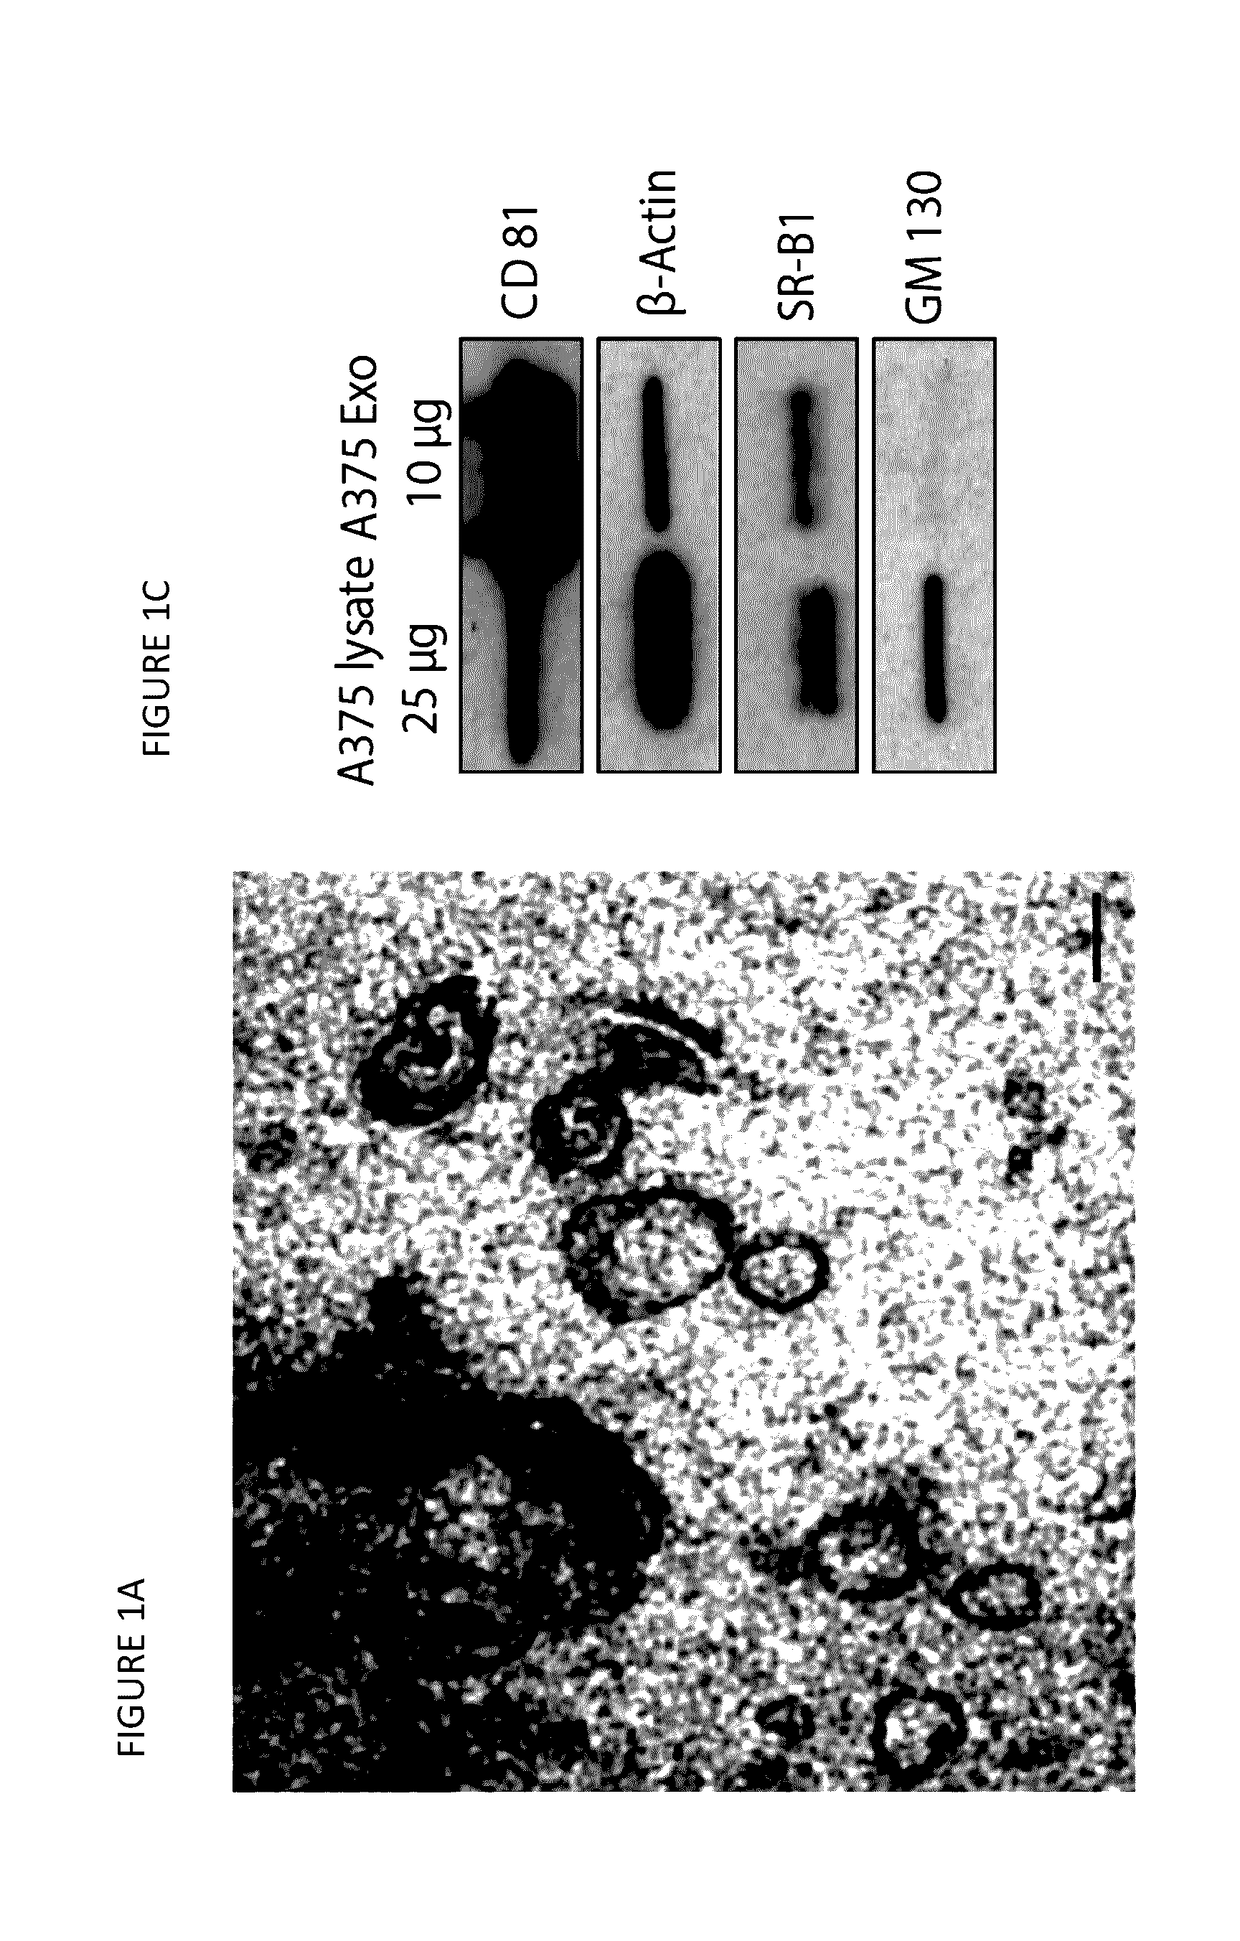 Nanostructures for modulating intercellular communication and uses thereof